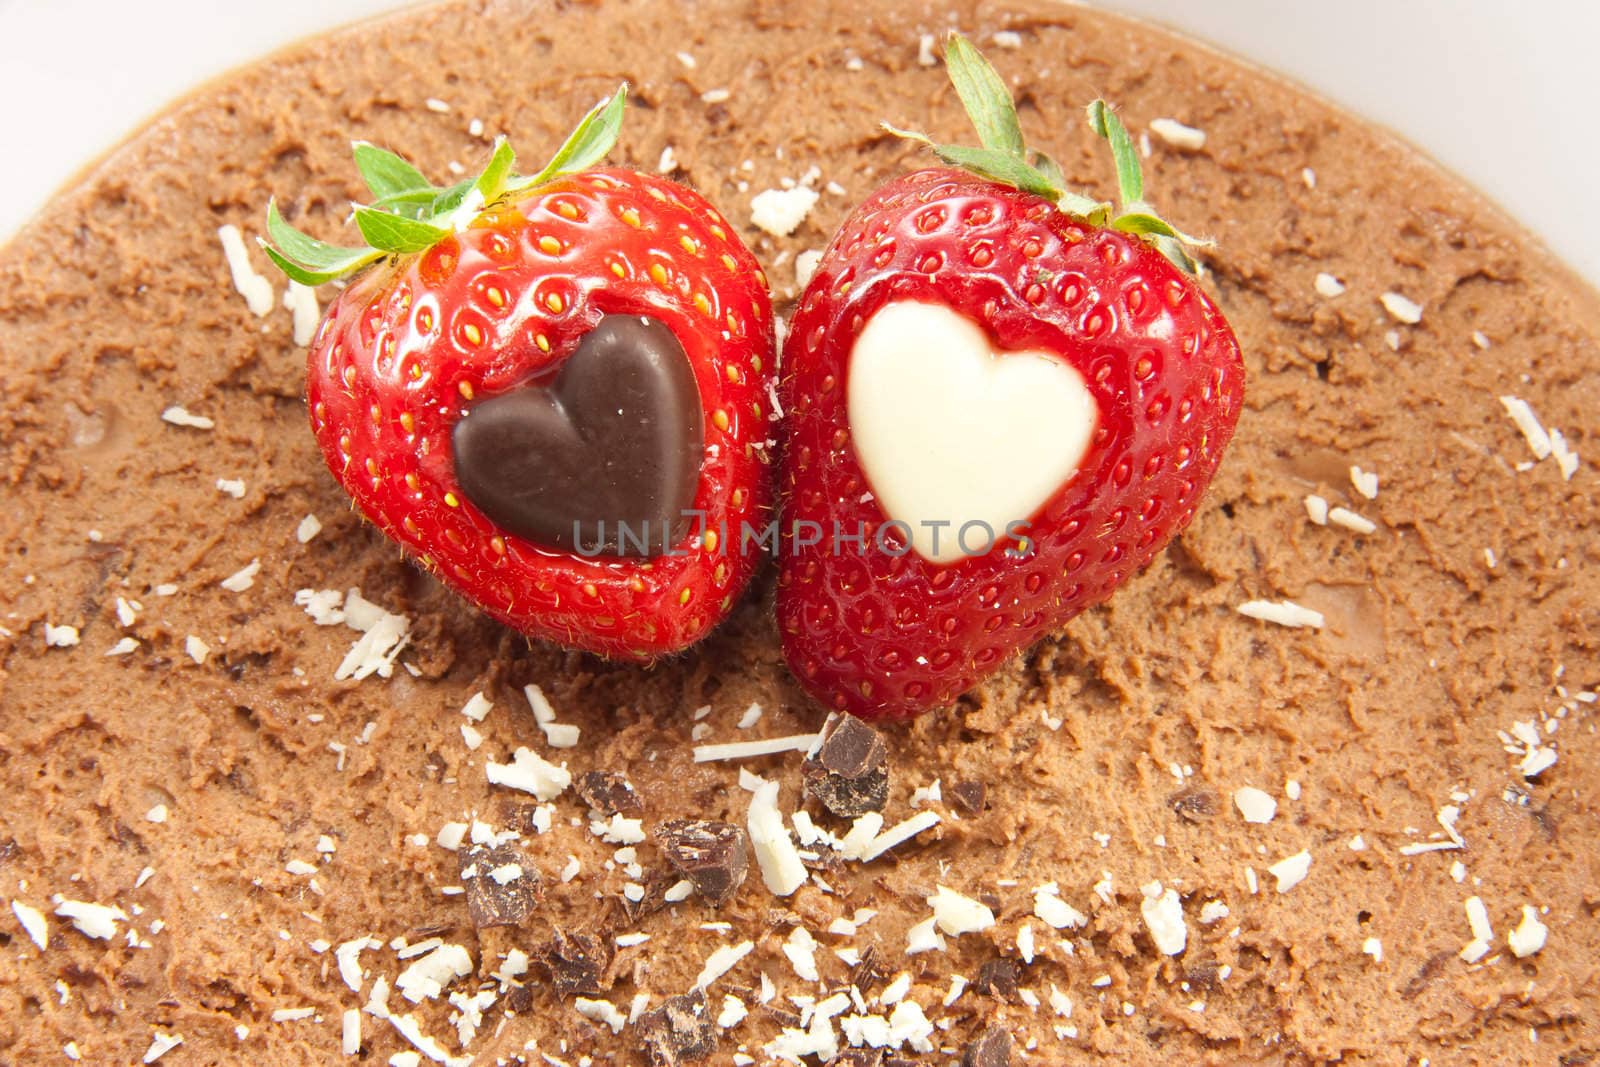 Strawberries on chocolate mousse by Stootsy